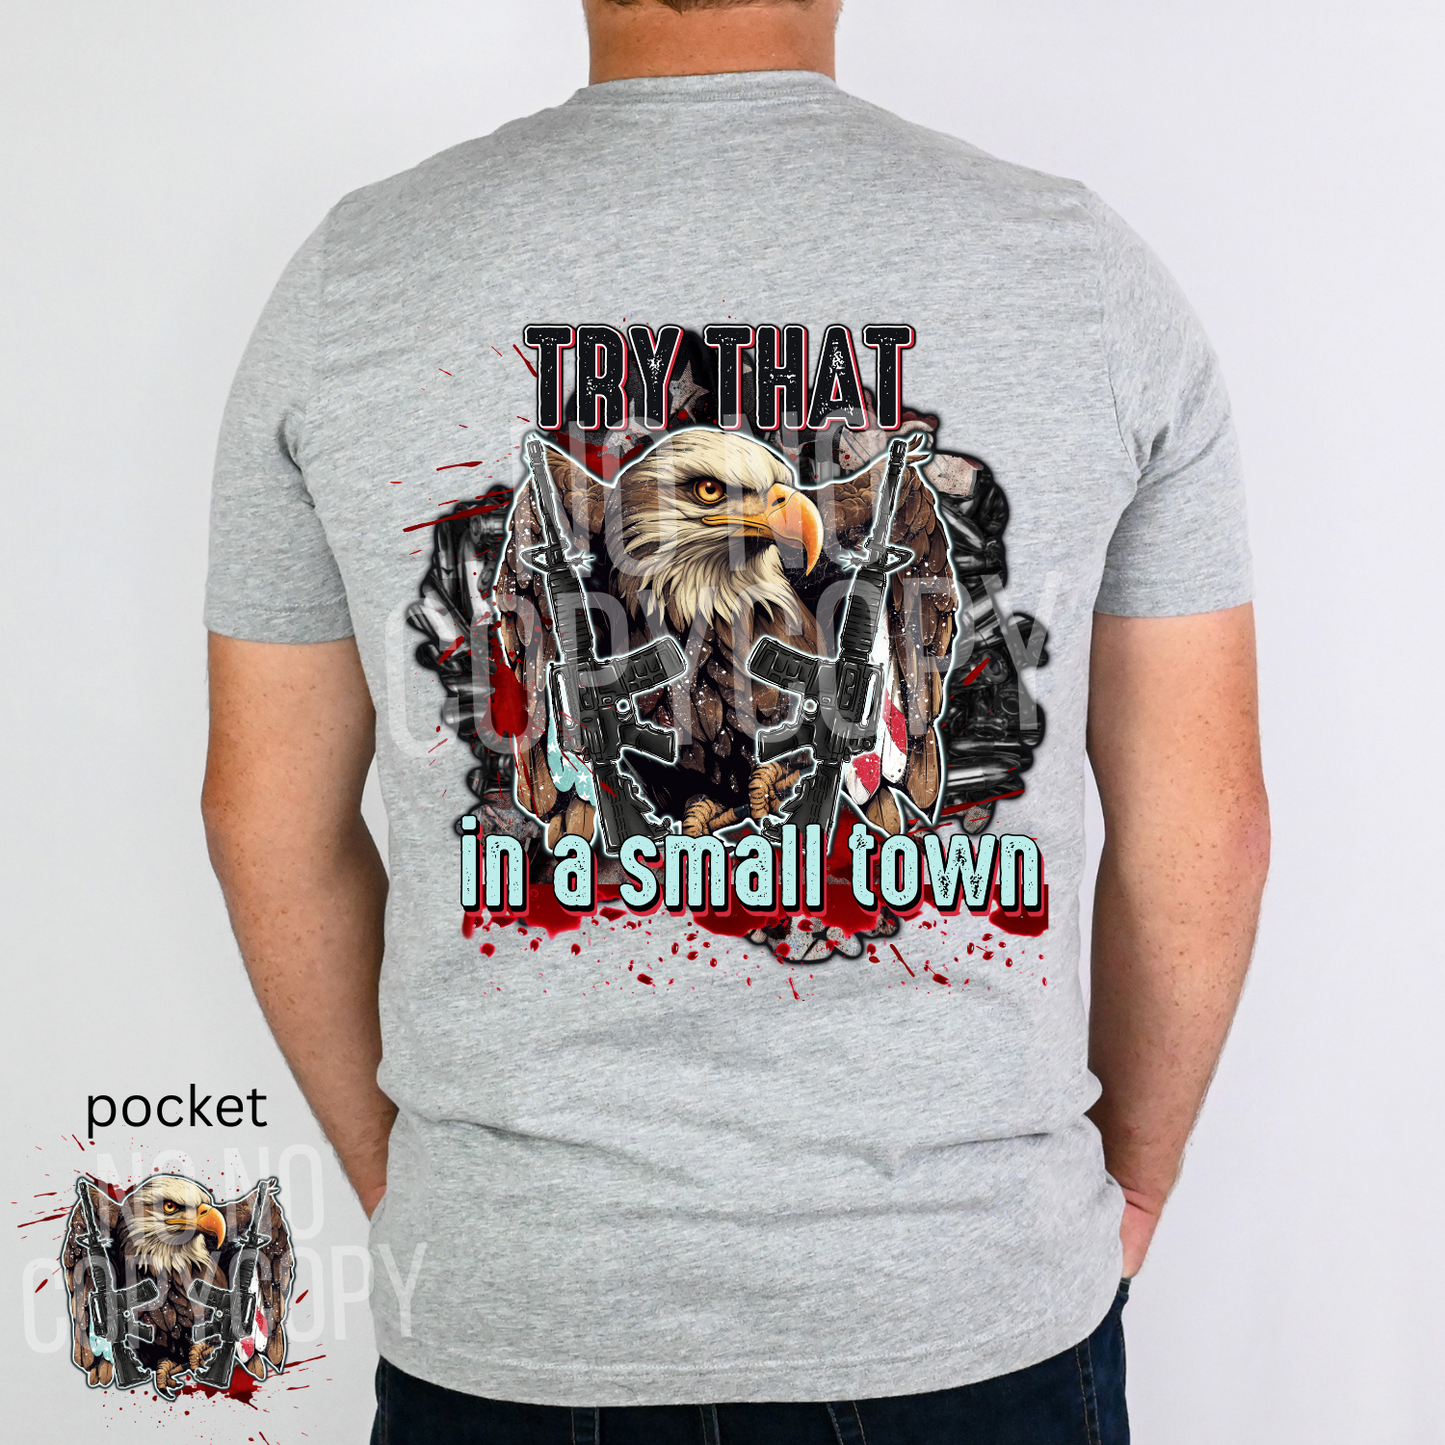 SMALL TOWN WITH POCKET